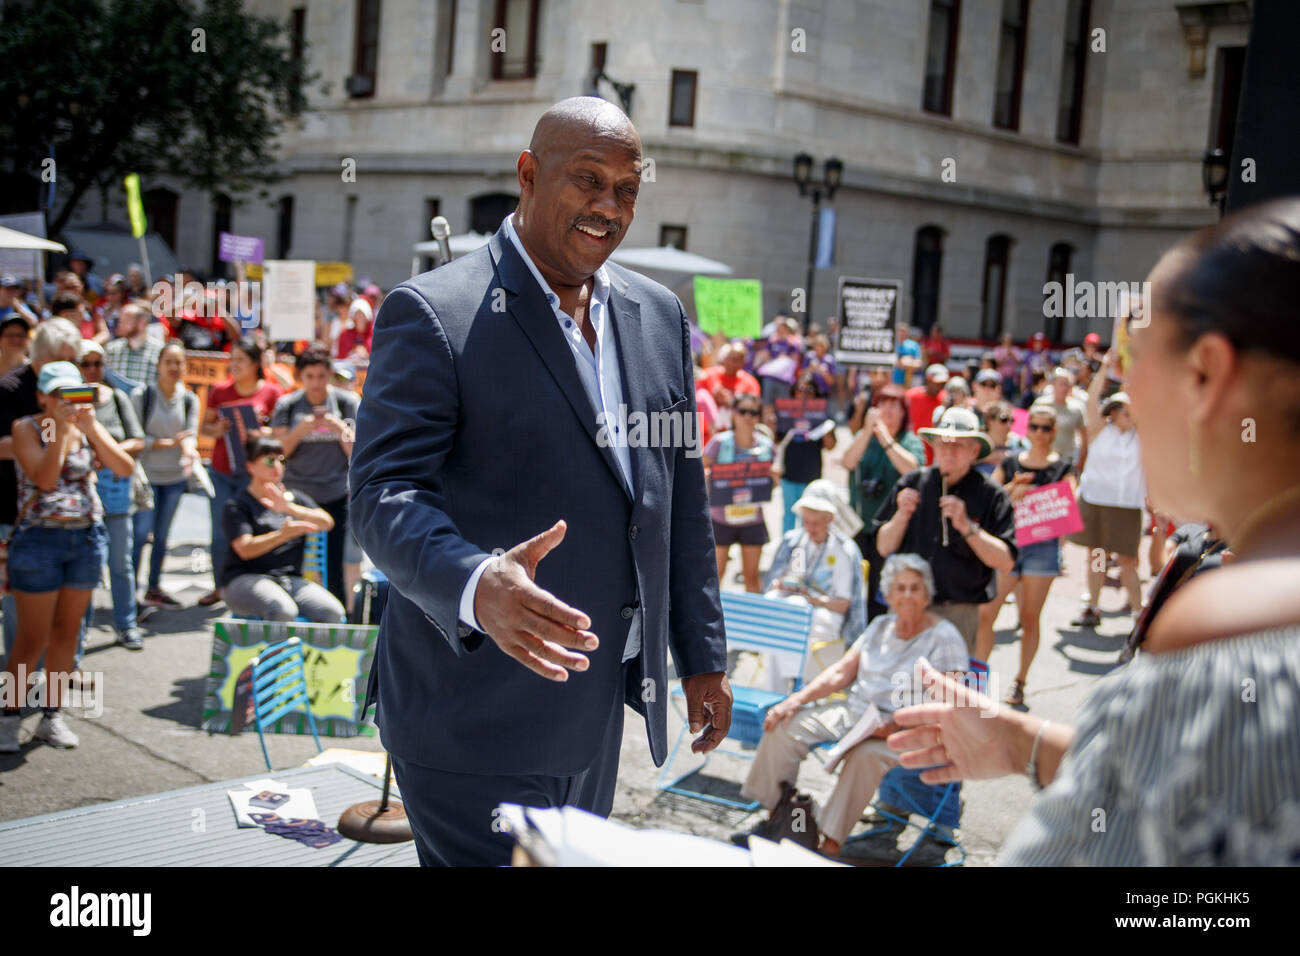 Philadelphia, United States. 26th Aug, 2018. Congressman Dwight Evans (PA-2) shakes hands after addressing demonstrators gathered for the Unite for Justice rally held in the courtyard of City Hall, organized by progressive activists to oppose the confirmation of President Trump's nominee for the Supreme Court, Brett Kavanaugh. Credit: Michael Candelori/Pacific Press/Alamy Live News Stock Photo